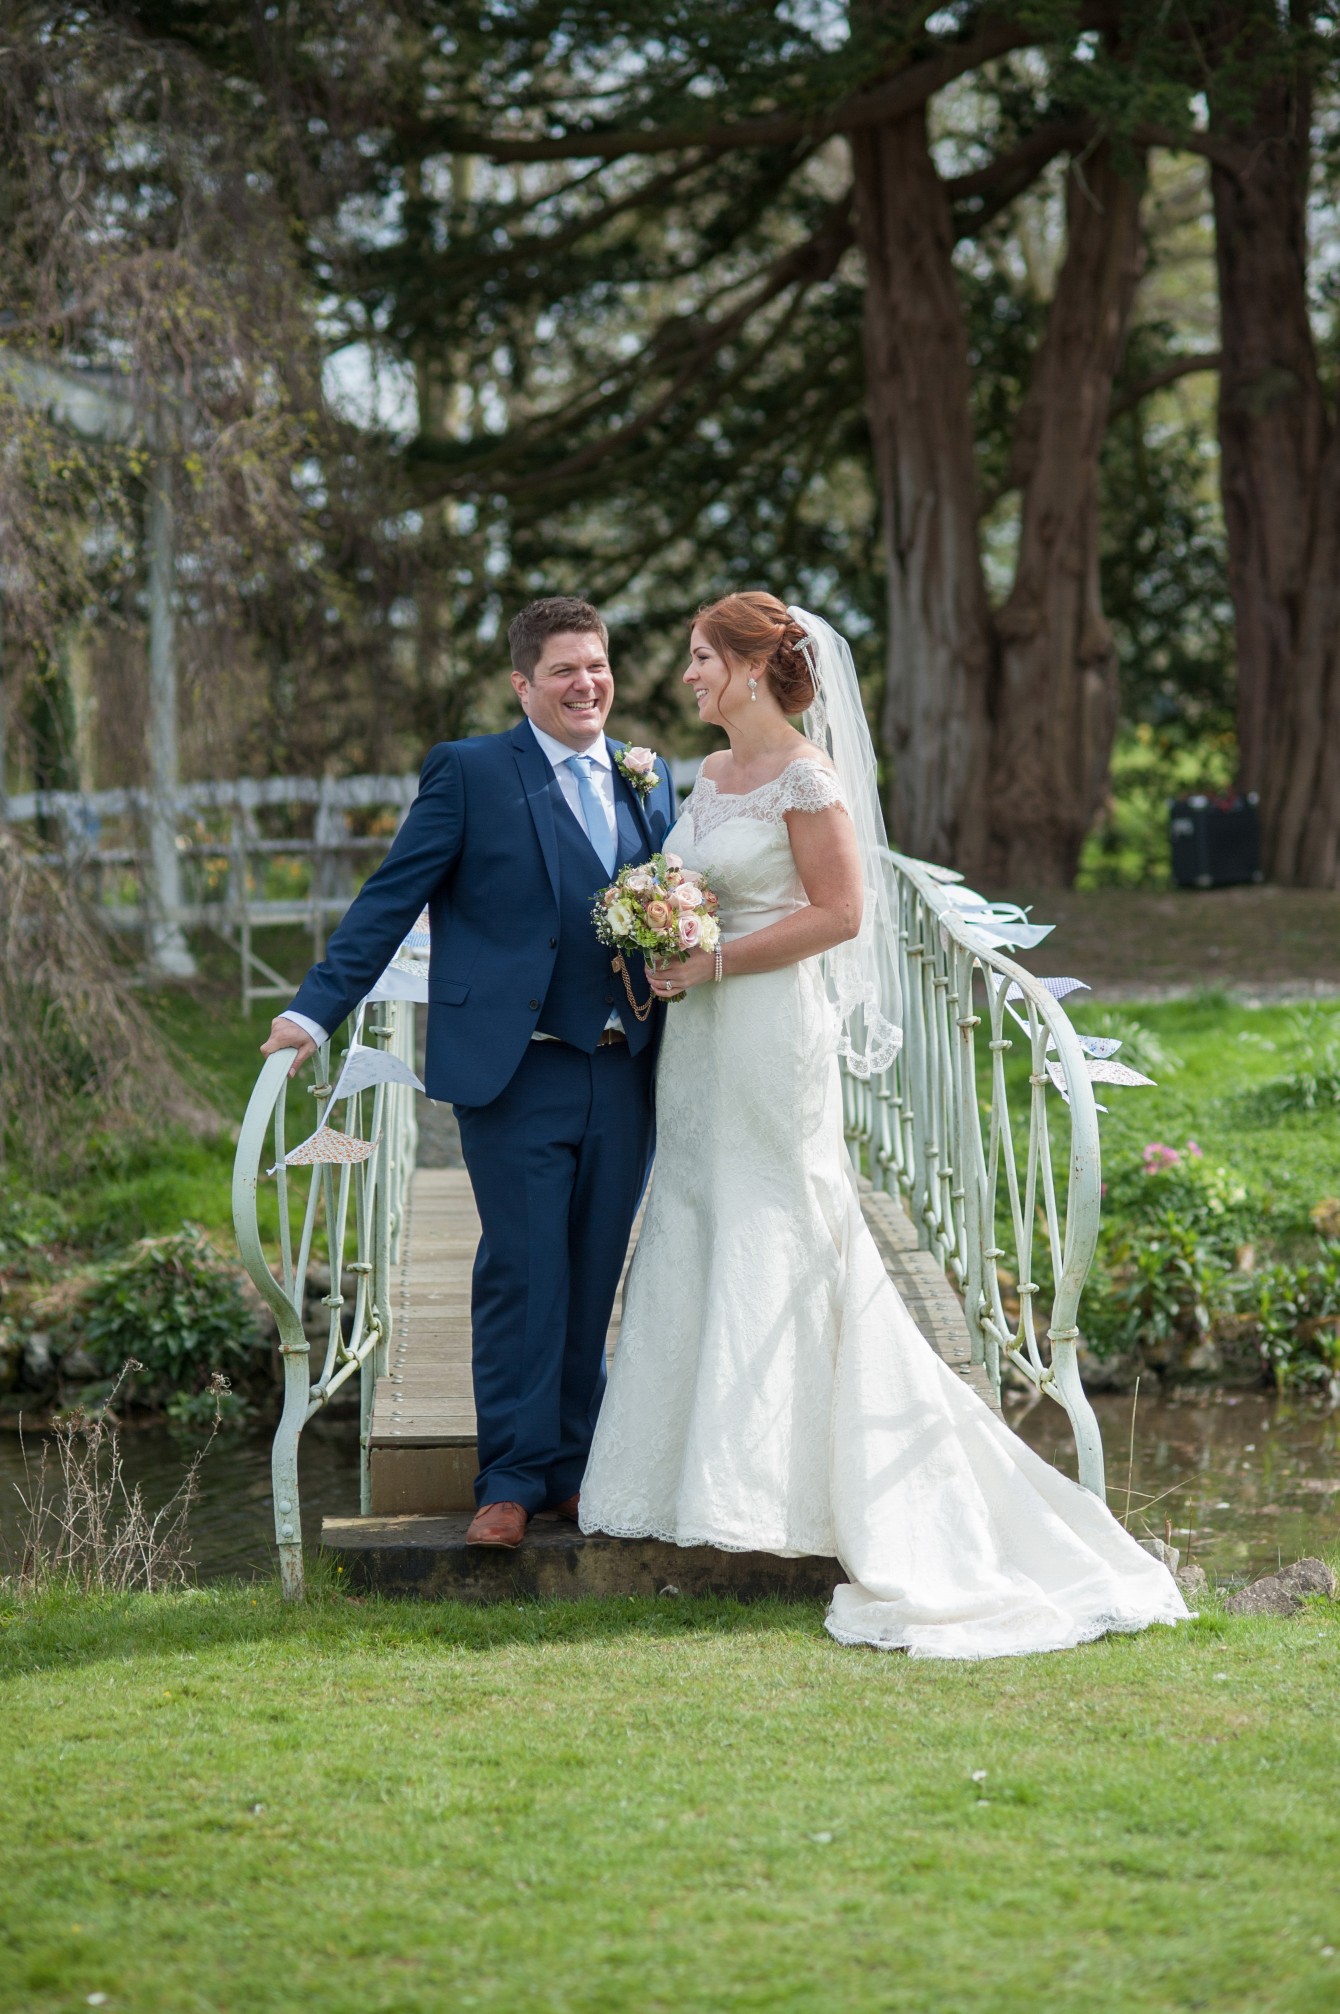 Wedding photography at Preston Court in Canterbury - the bride & groom